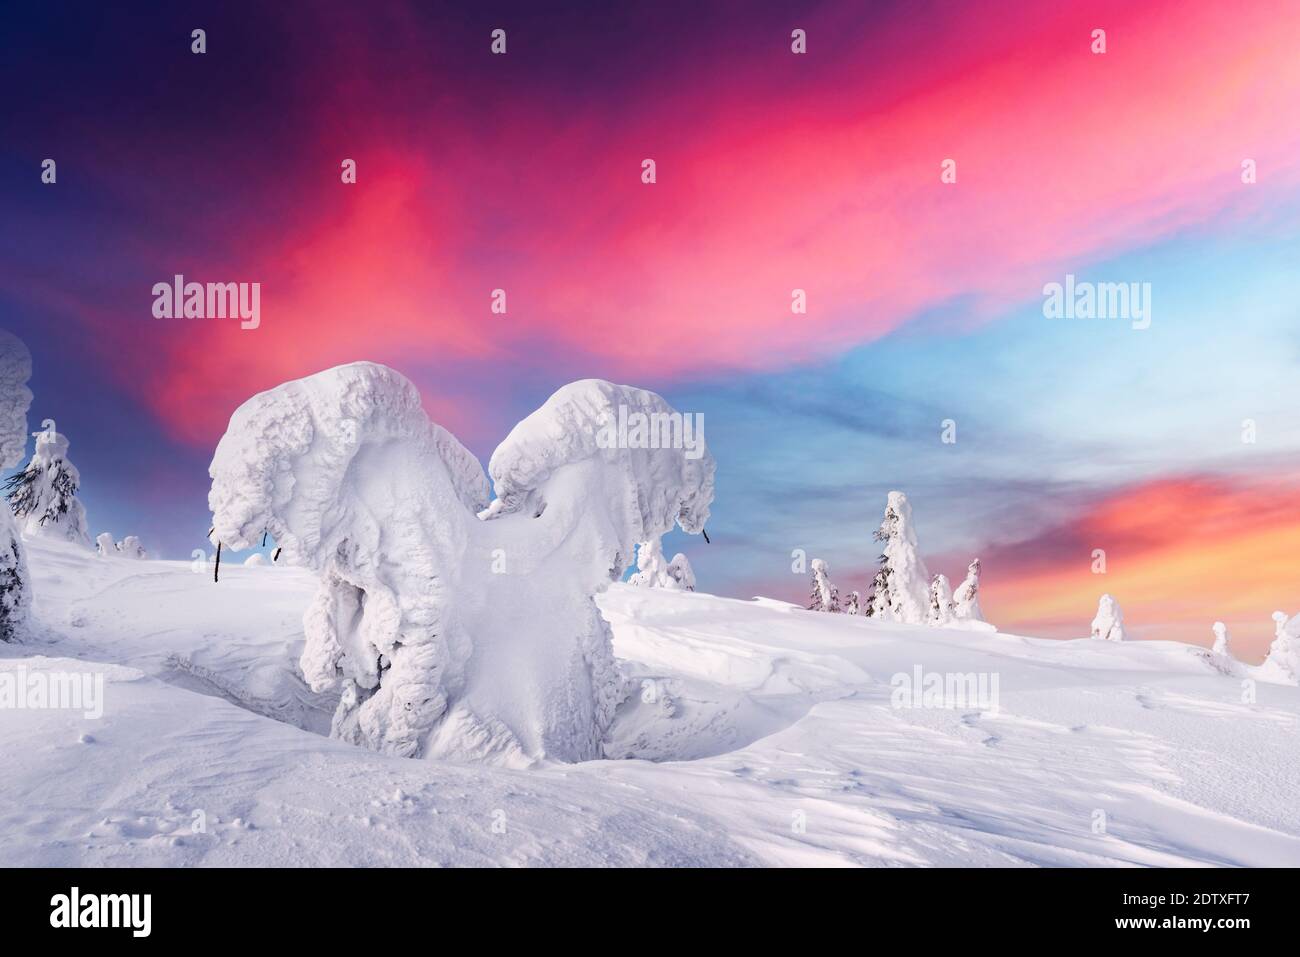 Fantastic winter landscape with snowy trees and sunrise pink sky. Lapland, Finland, Europe. Christmas holiday concept Stock Photo